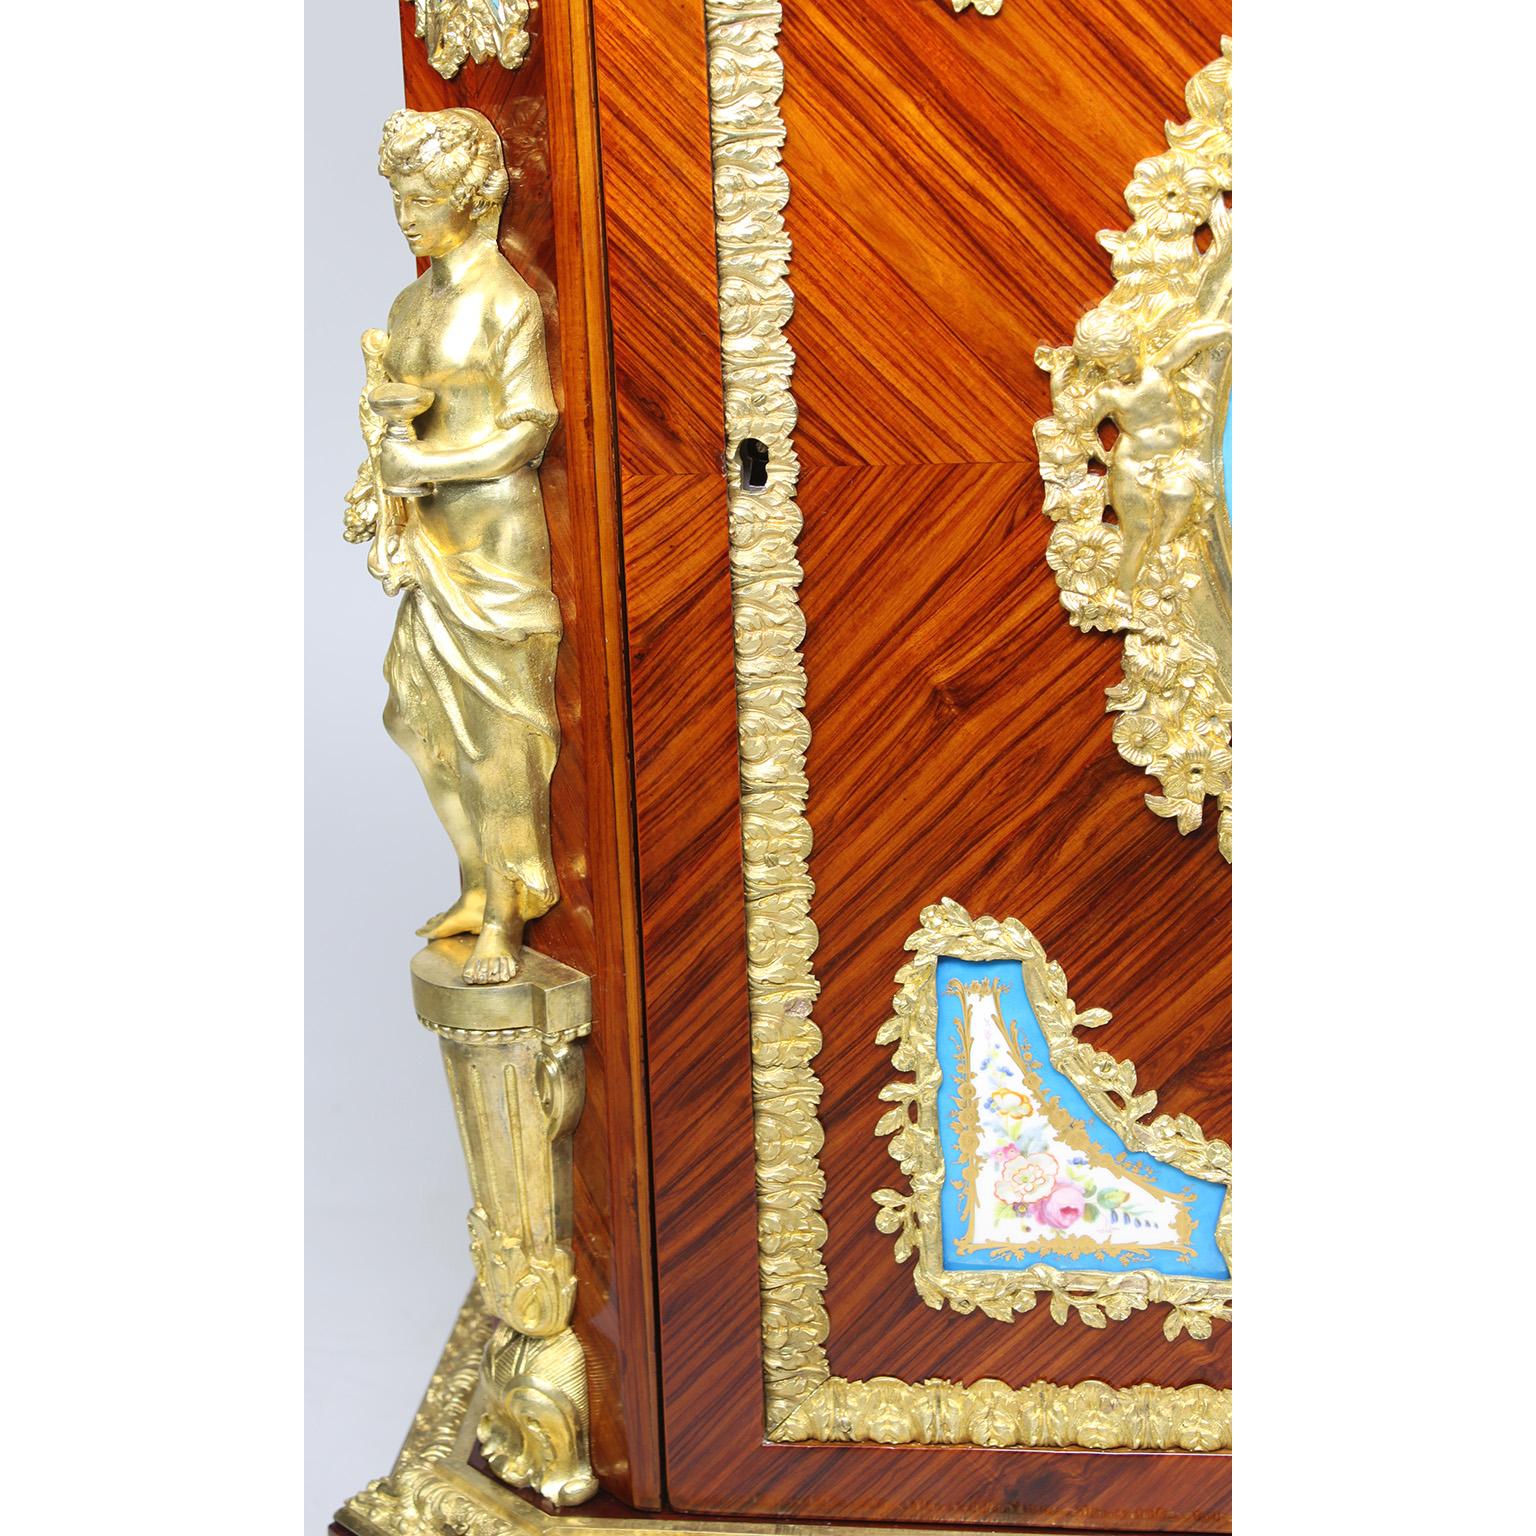 19th Century French Napoleon III Ormolu & Porcelain Mounted Cabinet Meuble D'Appui by Befort For Sale